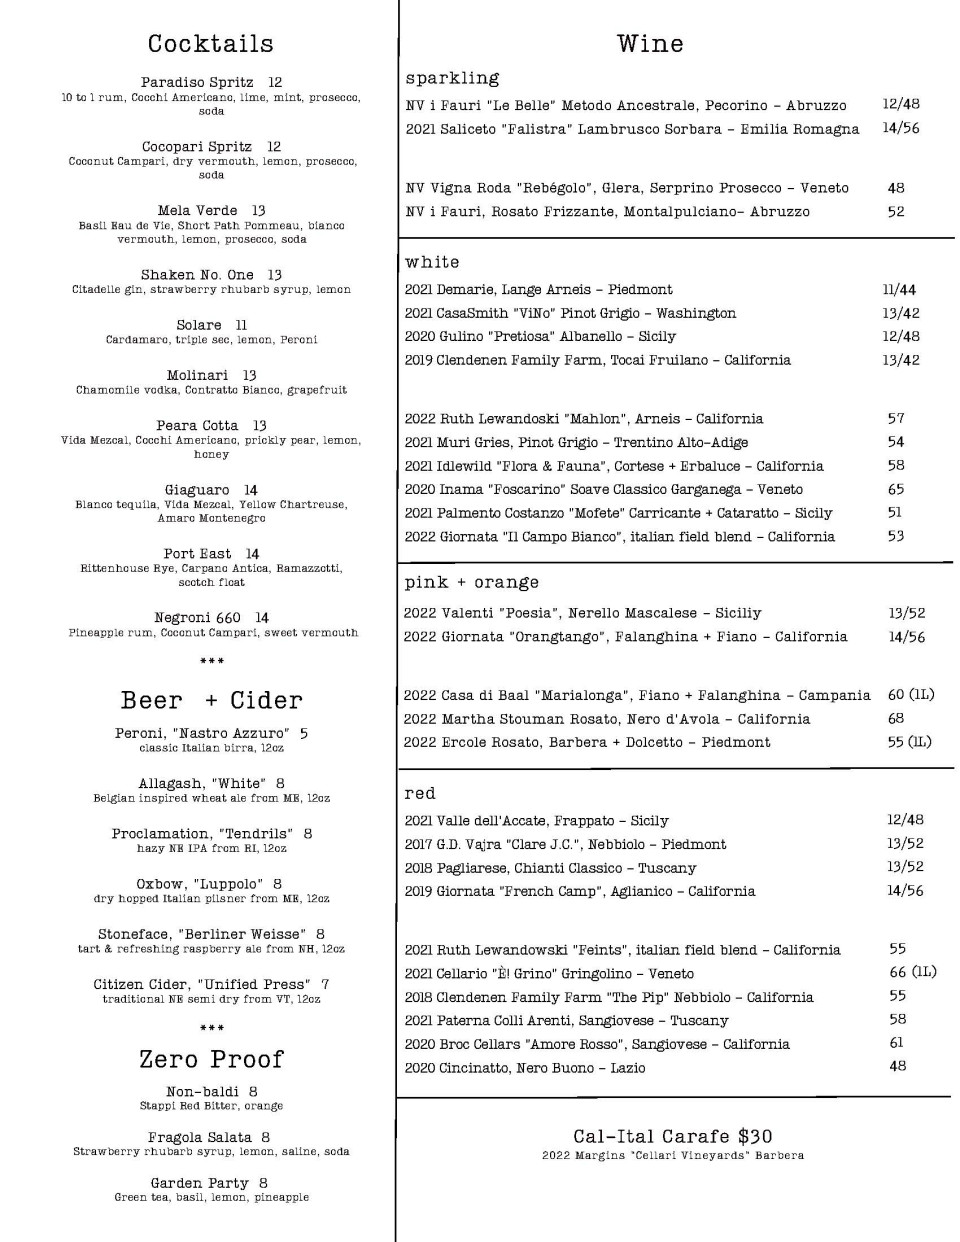 A page of an Italian restaurant menu with cocktails, beer, cider, mocktails, and wines.